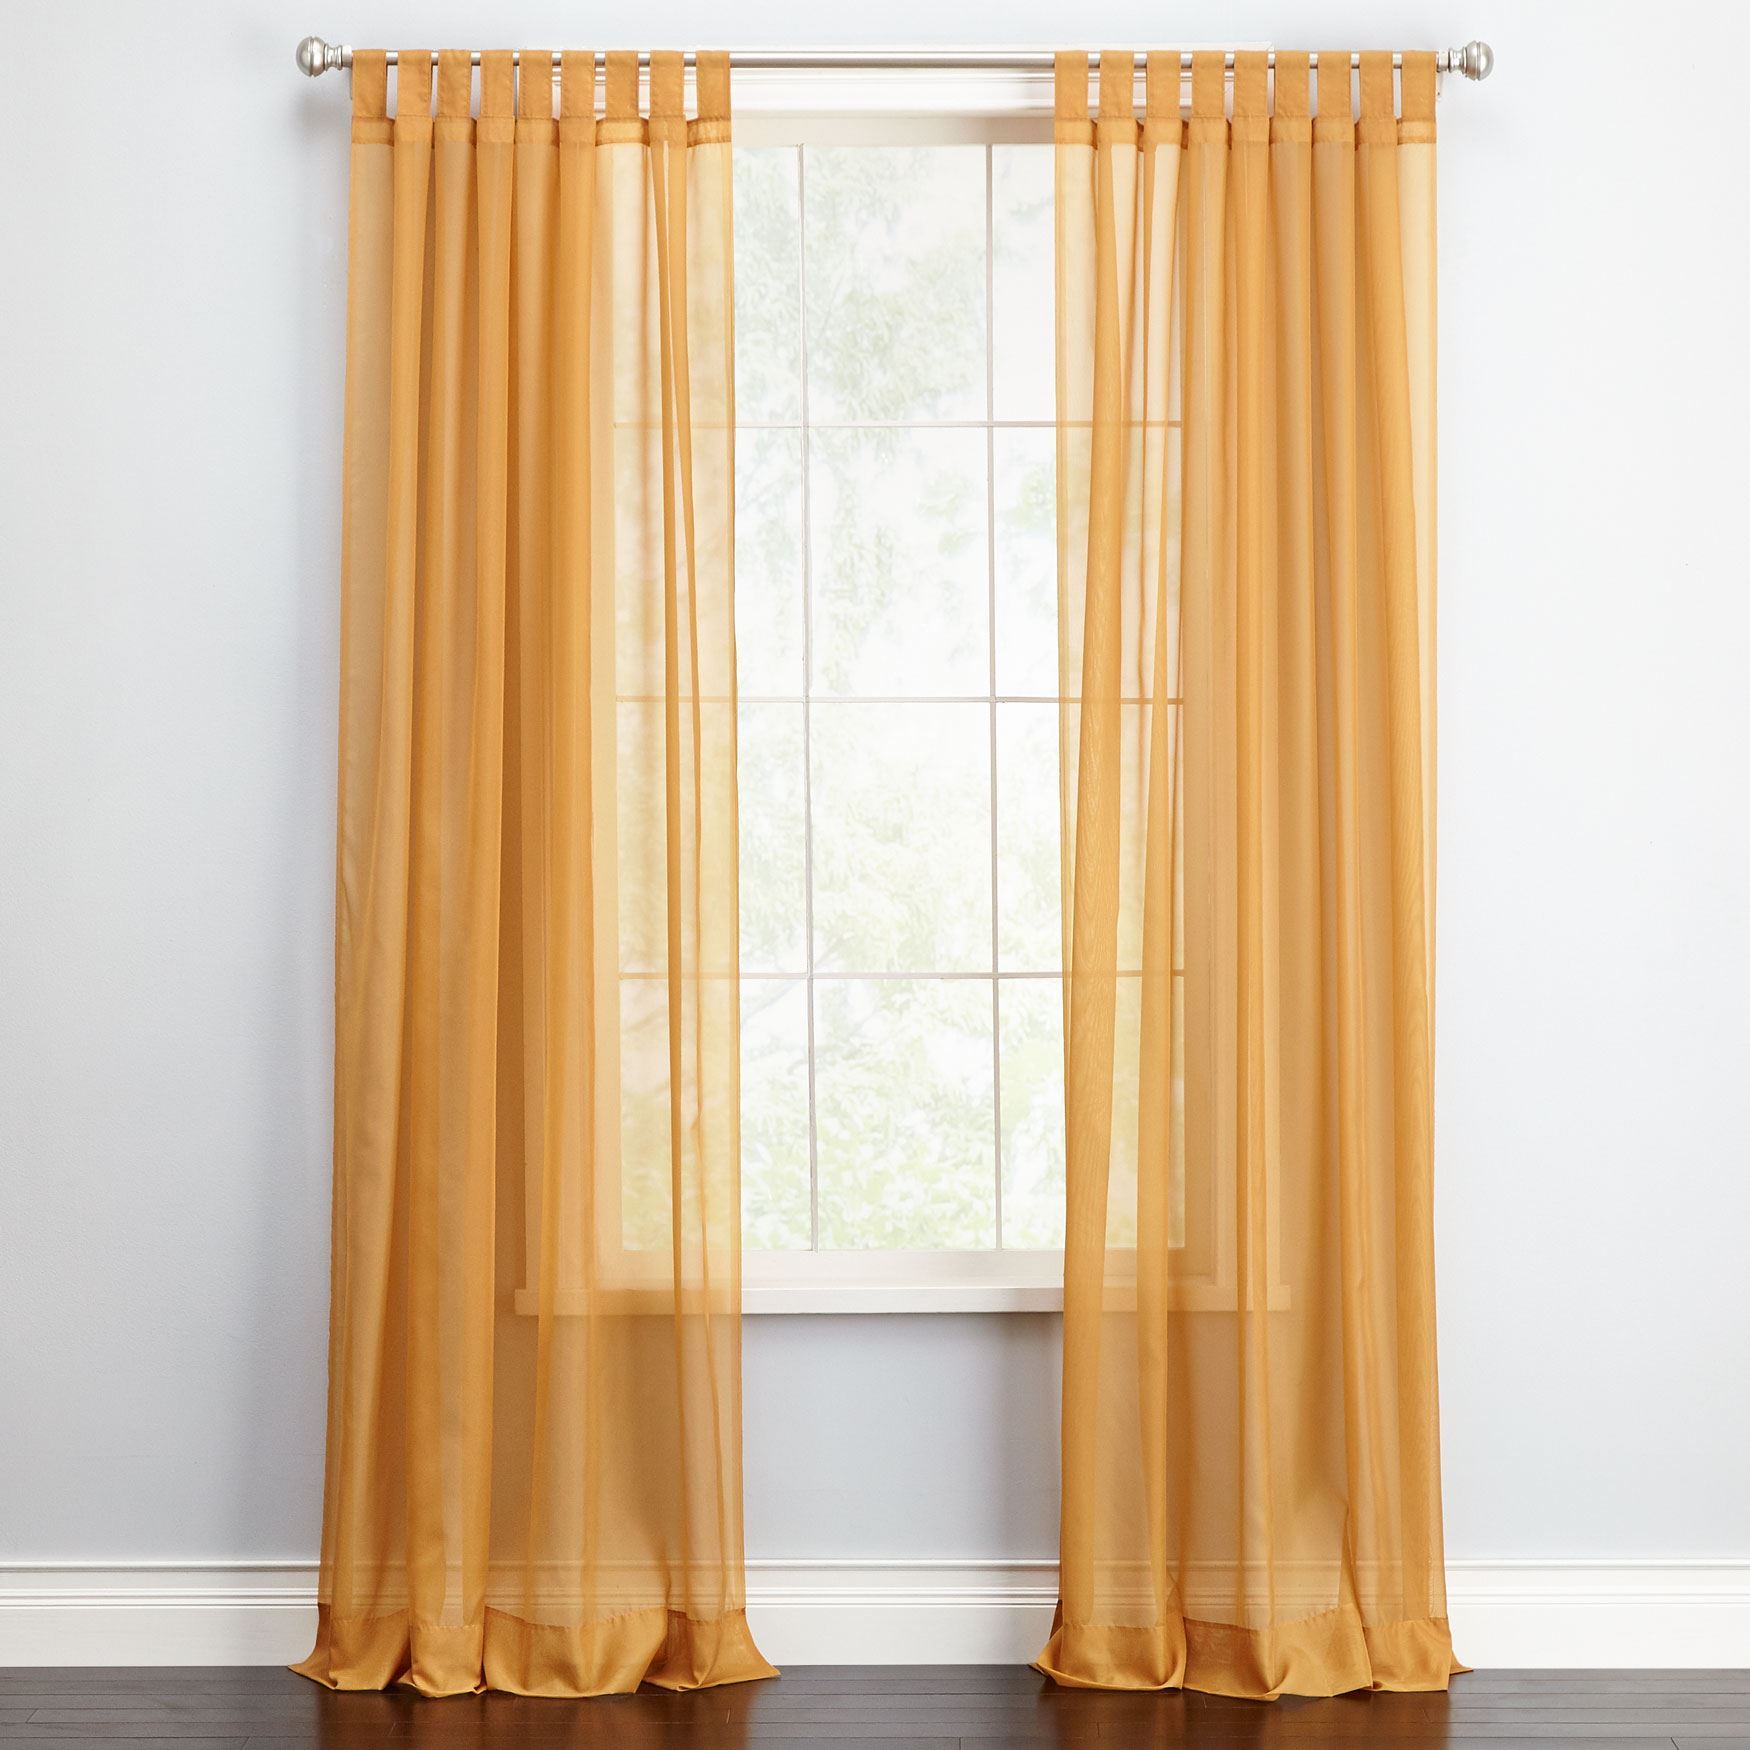 BH Studio Sheer Voile Window Collection, 